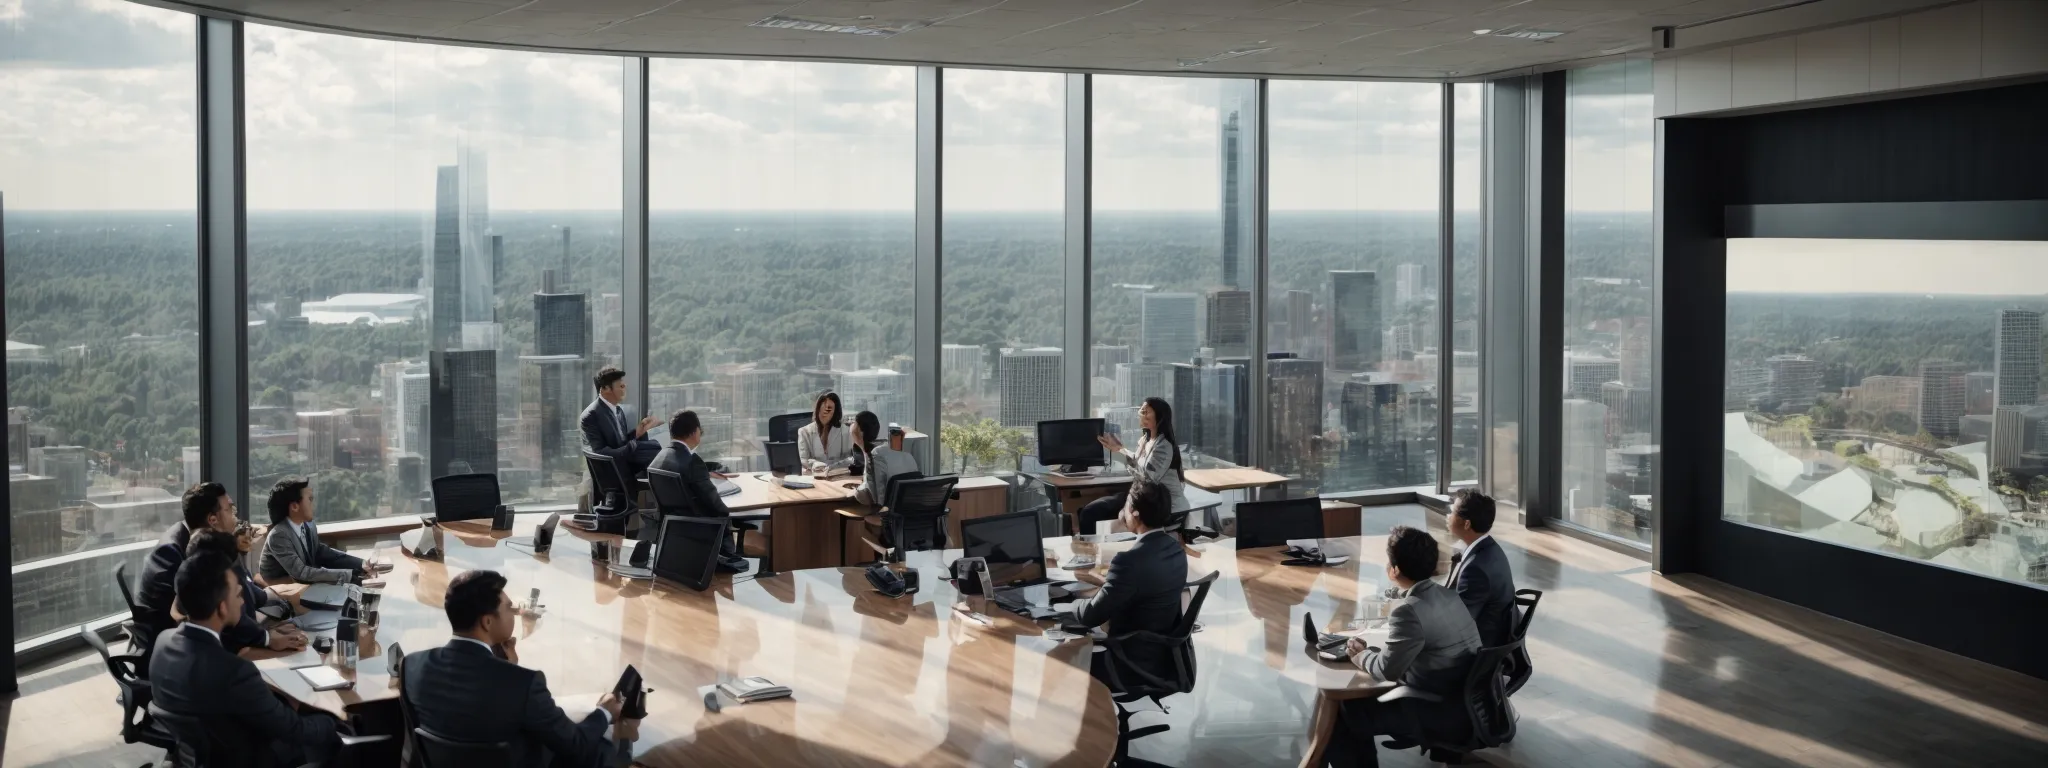 a professional meeting in a high-rise office with views of raleigh cityscape, discussing strategy over a digital screen displaying analytics.